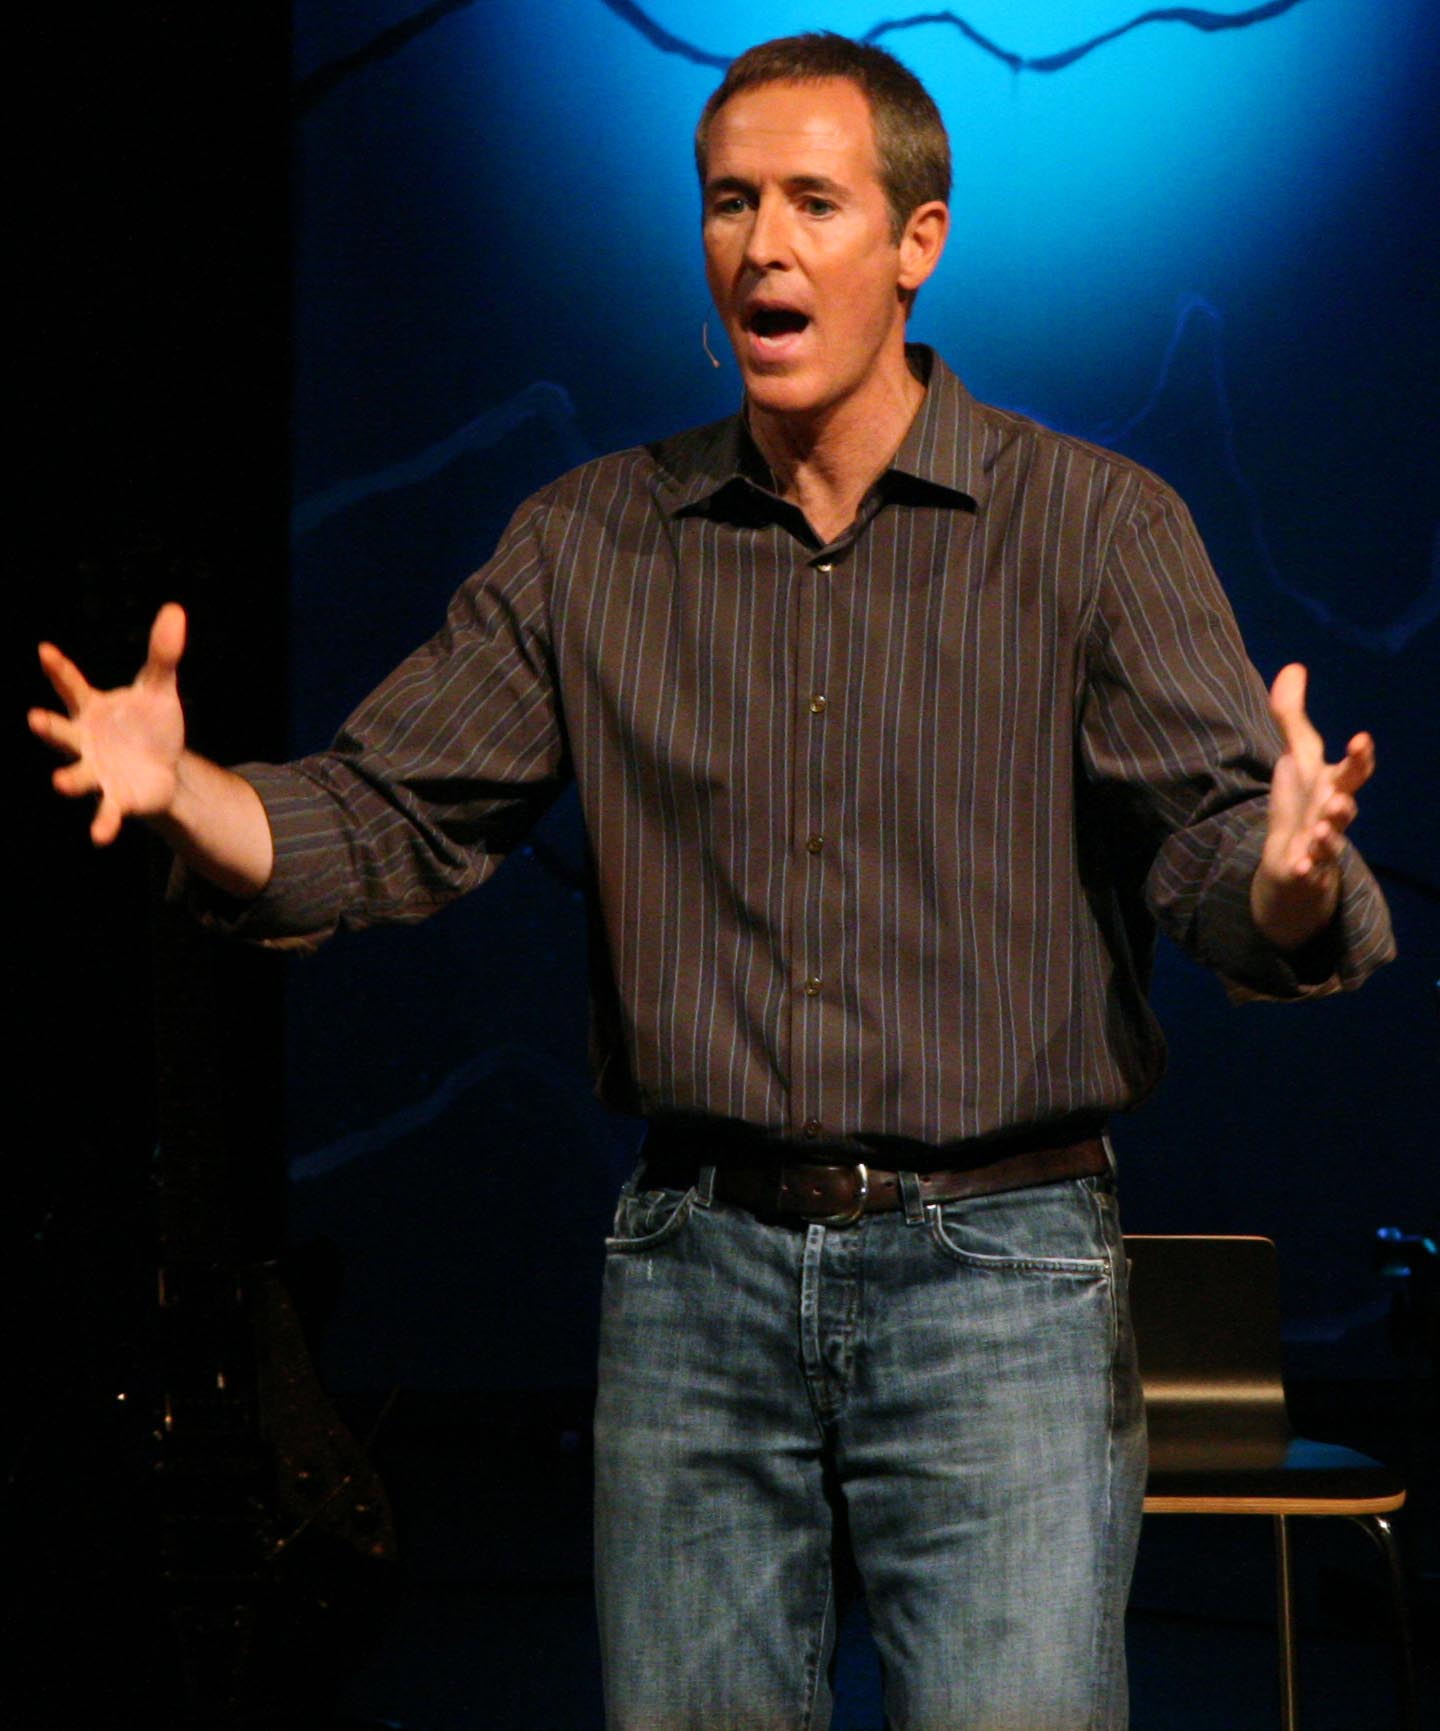 Athens Church: Andy Stanley in Athens